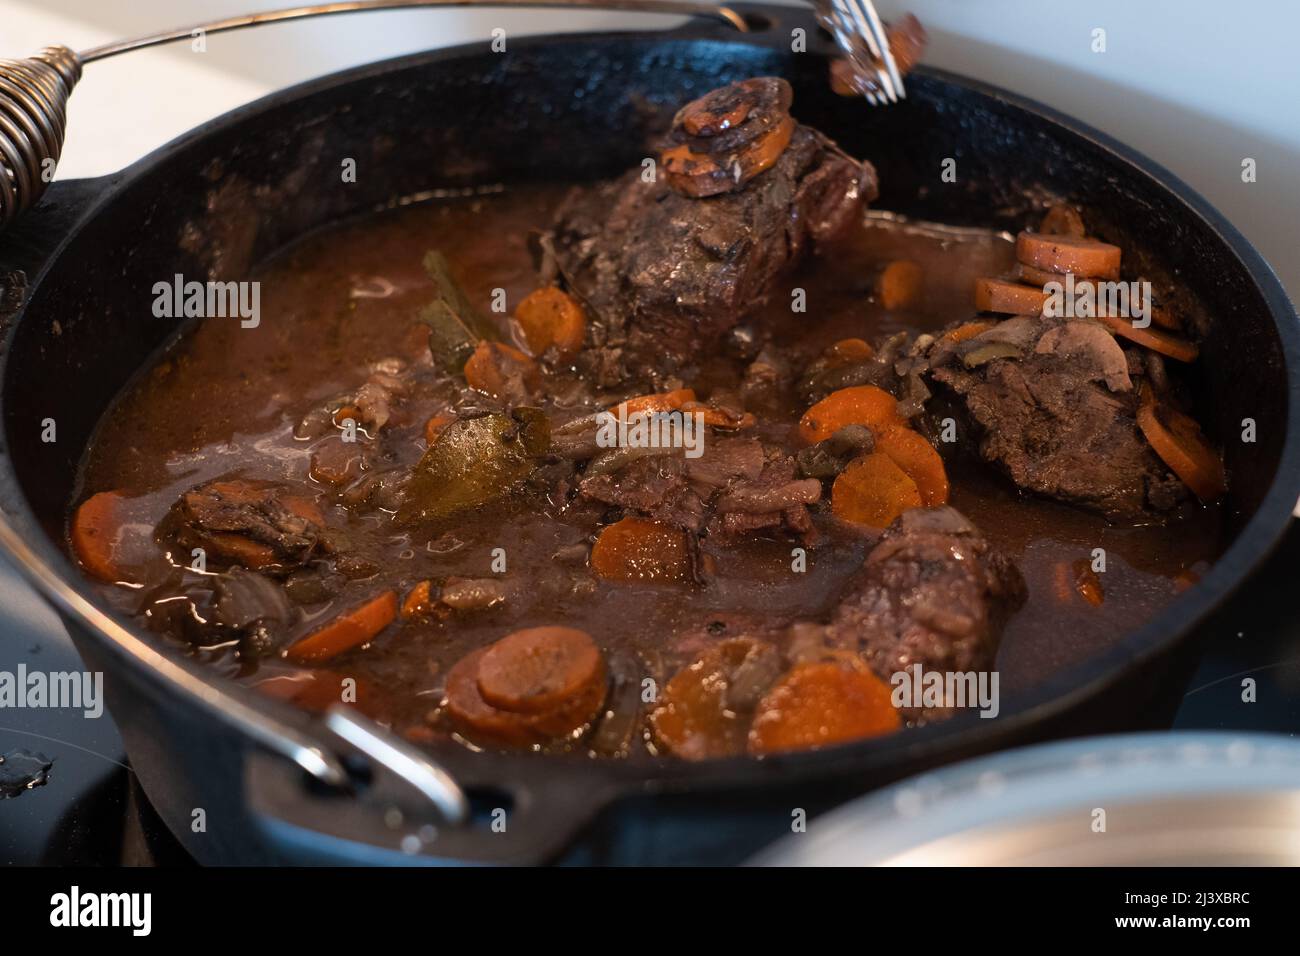 Braised beef cheeks cooking in red wine sauce in cast iron Dutch oven. Slow cooked meat stew. Stock Photo